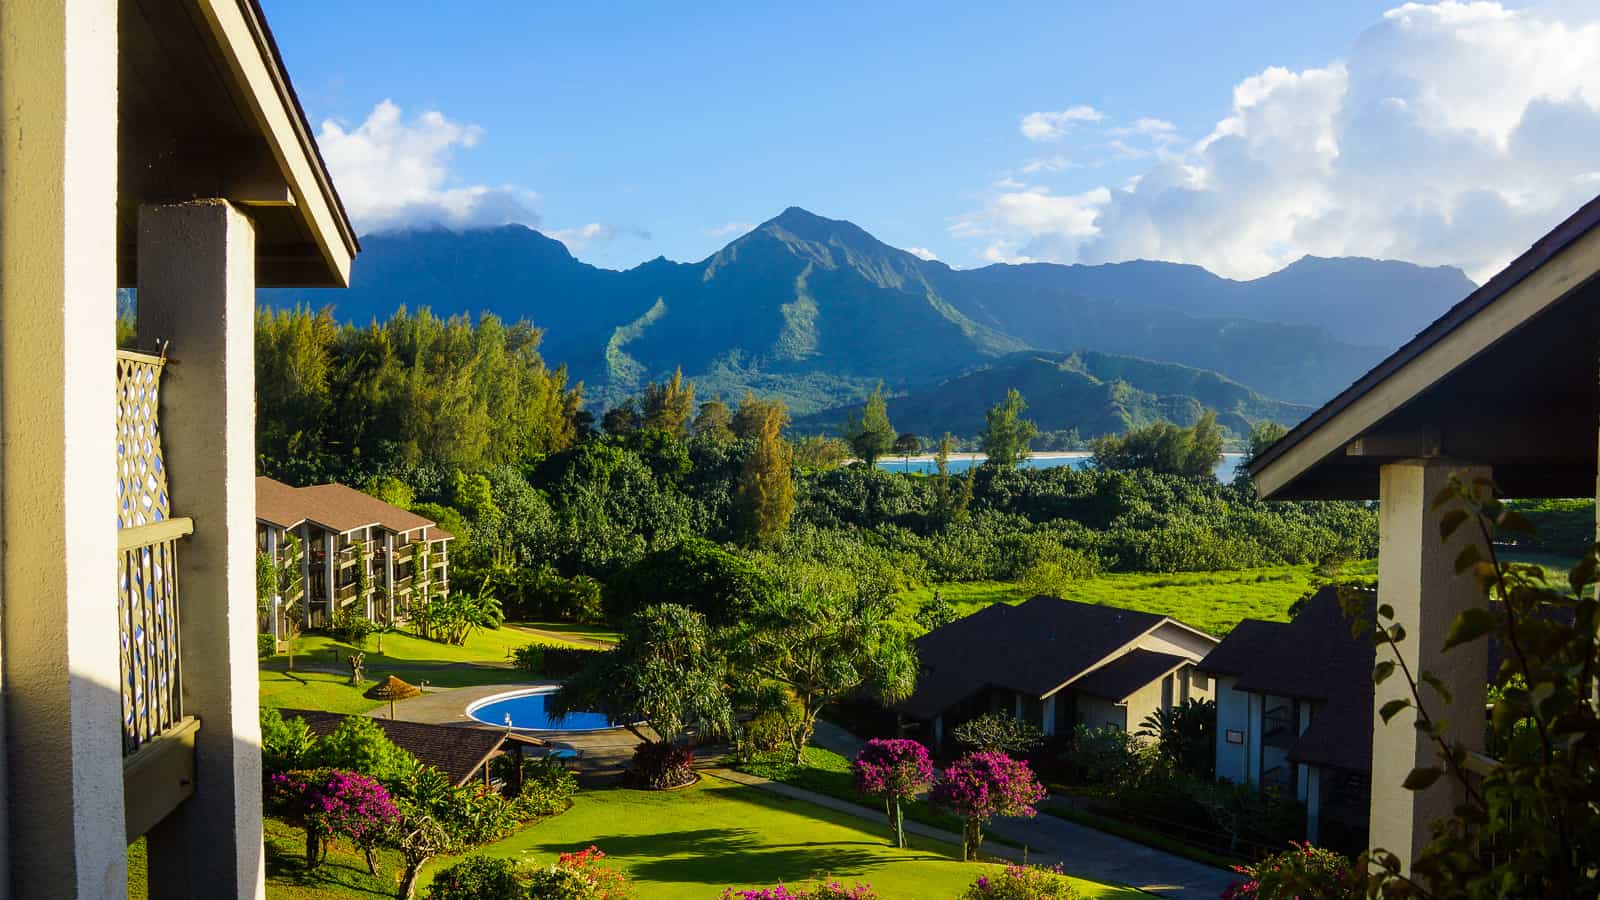 view from resort of Hanalei Bay - ultimate guide to kauai